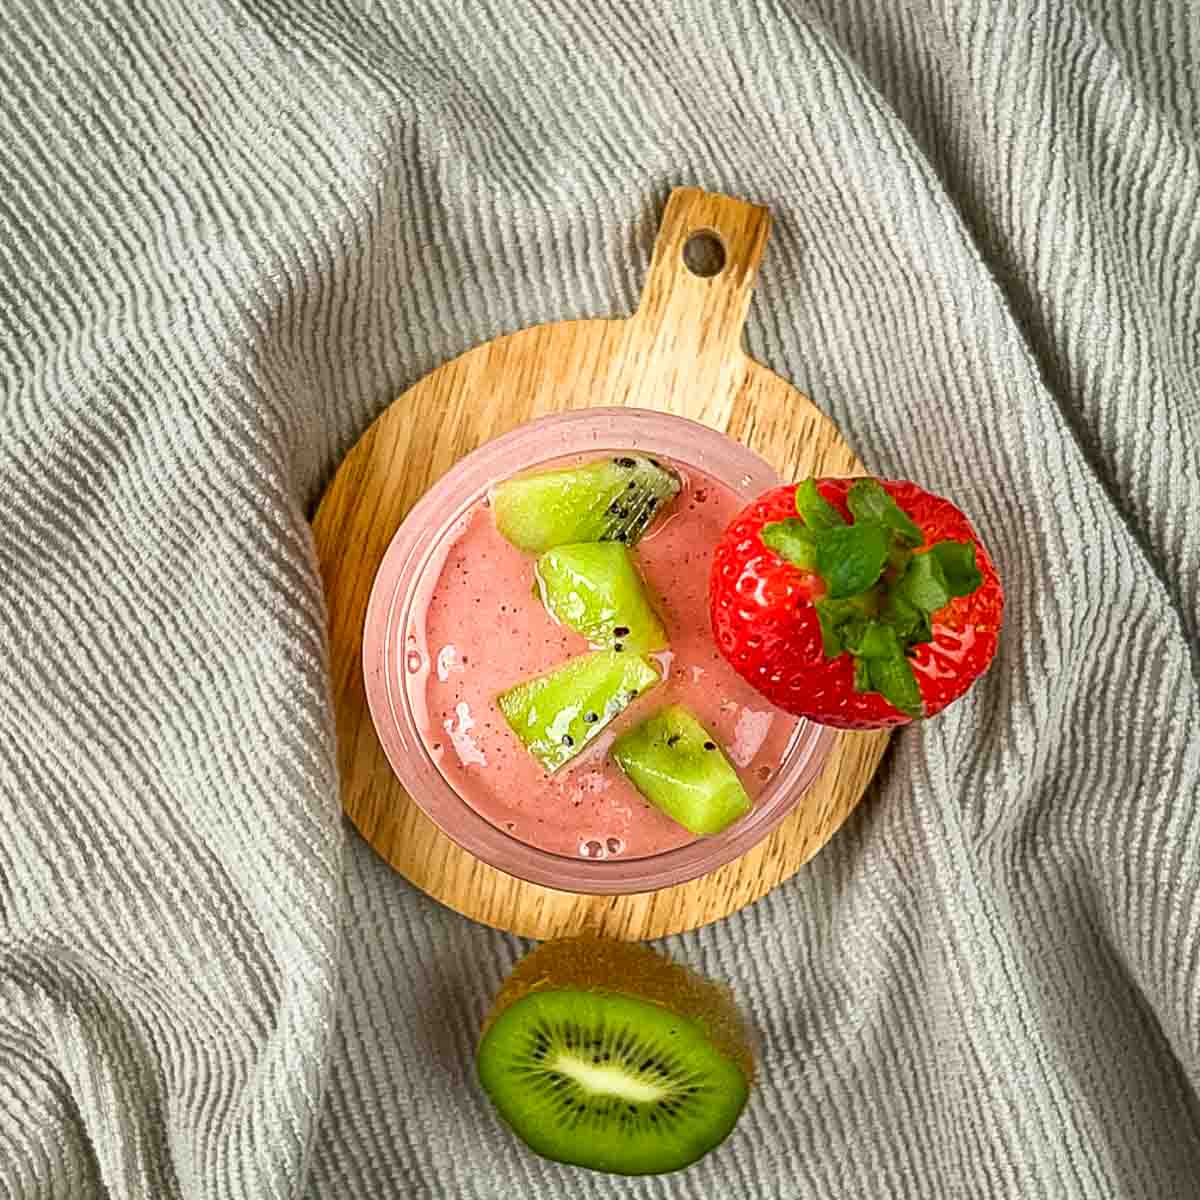 The smoothie in a tall glass garnished with chopped kiwi and a fresh strawberry.